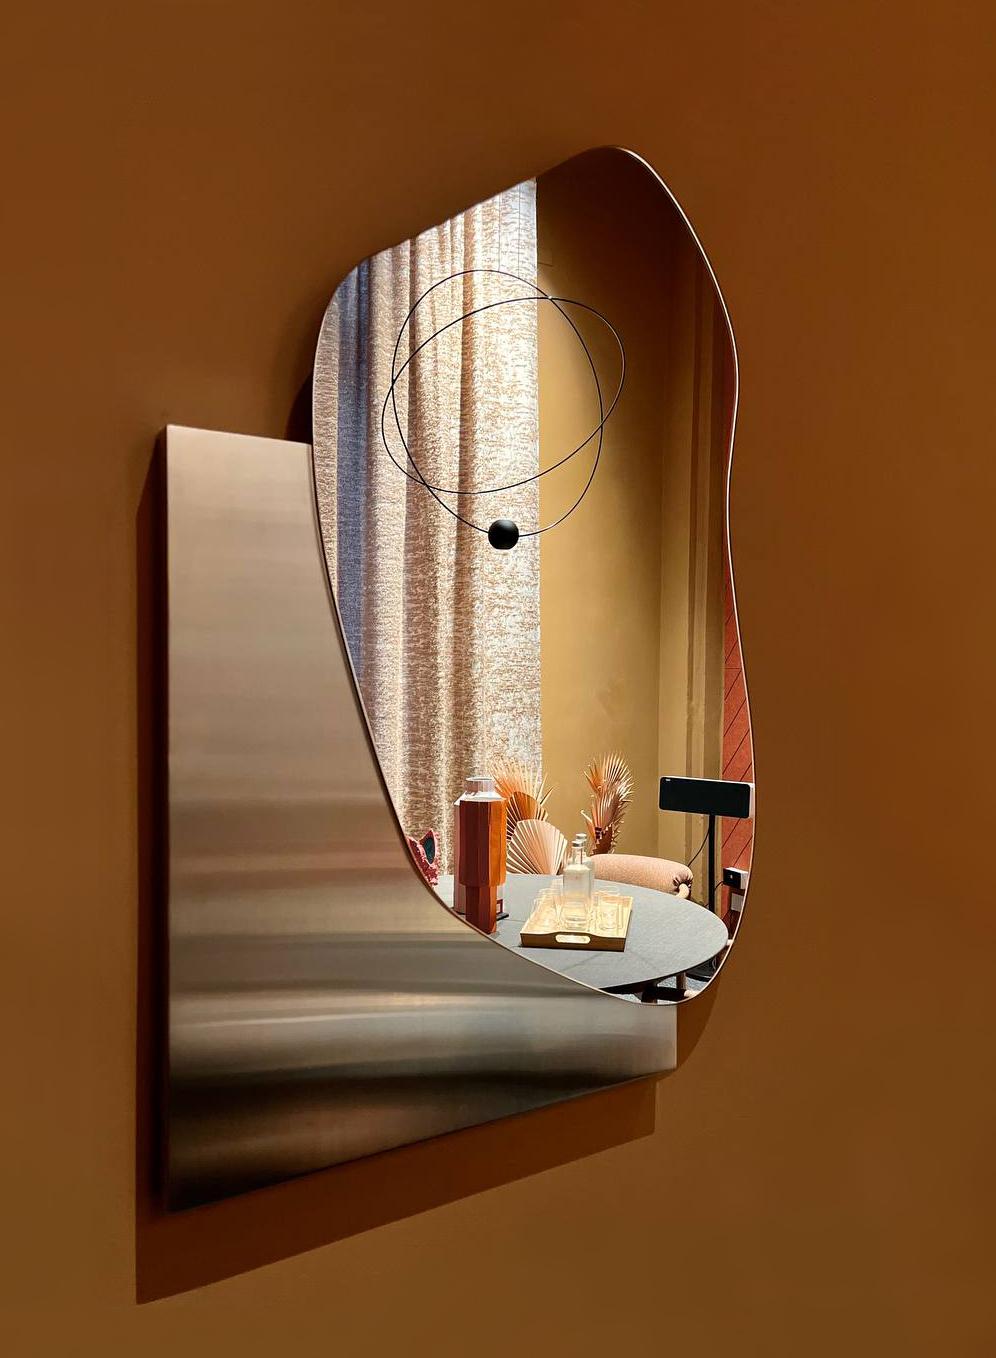 Painted Modern Wall Mirror Lake 1 by Noom with Base in Stainless Steel